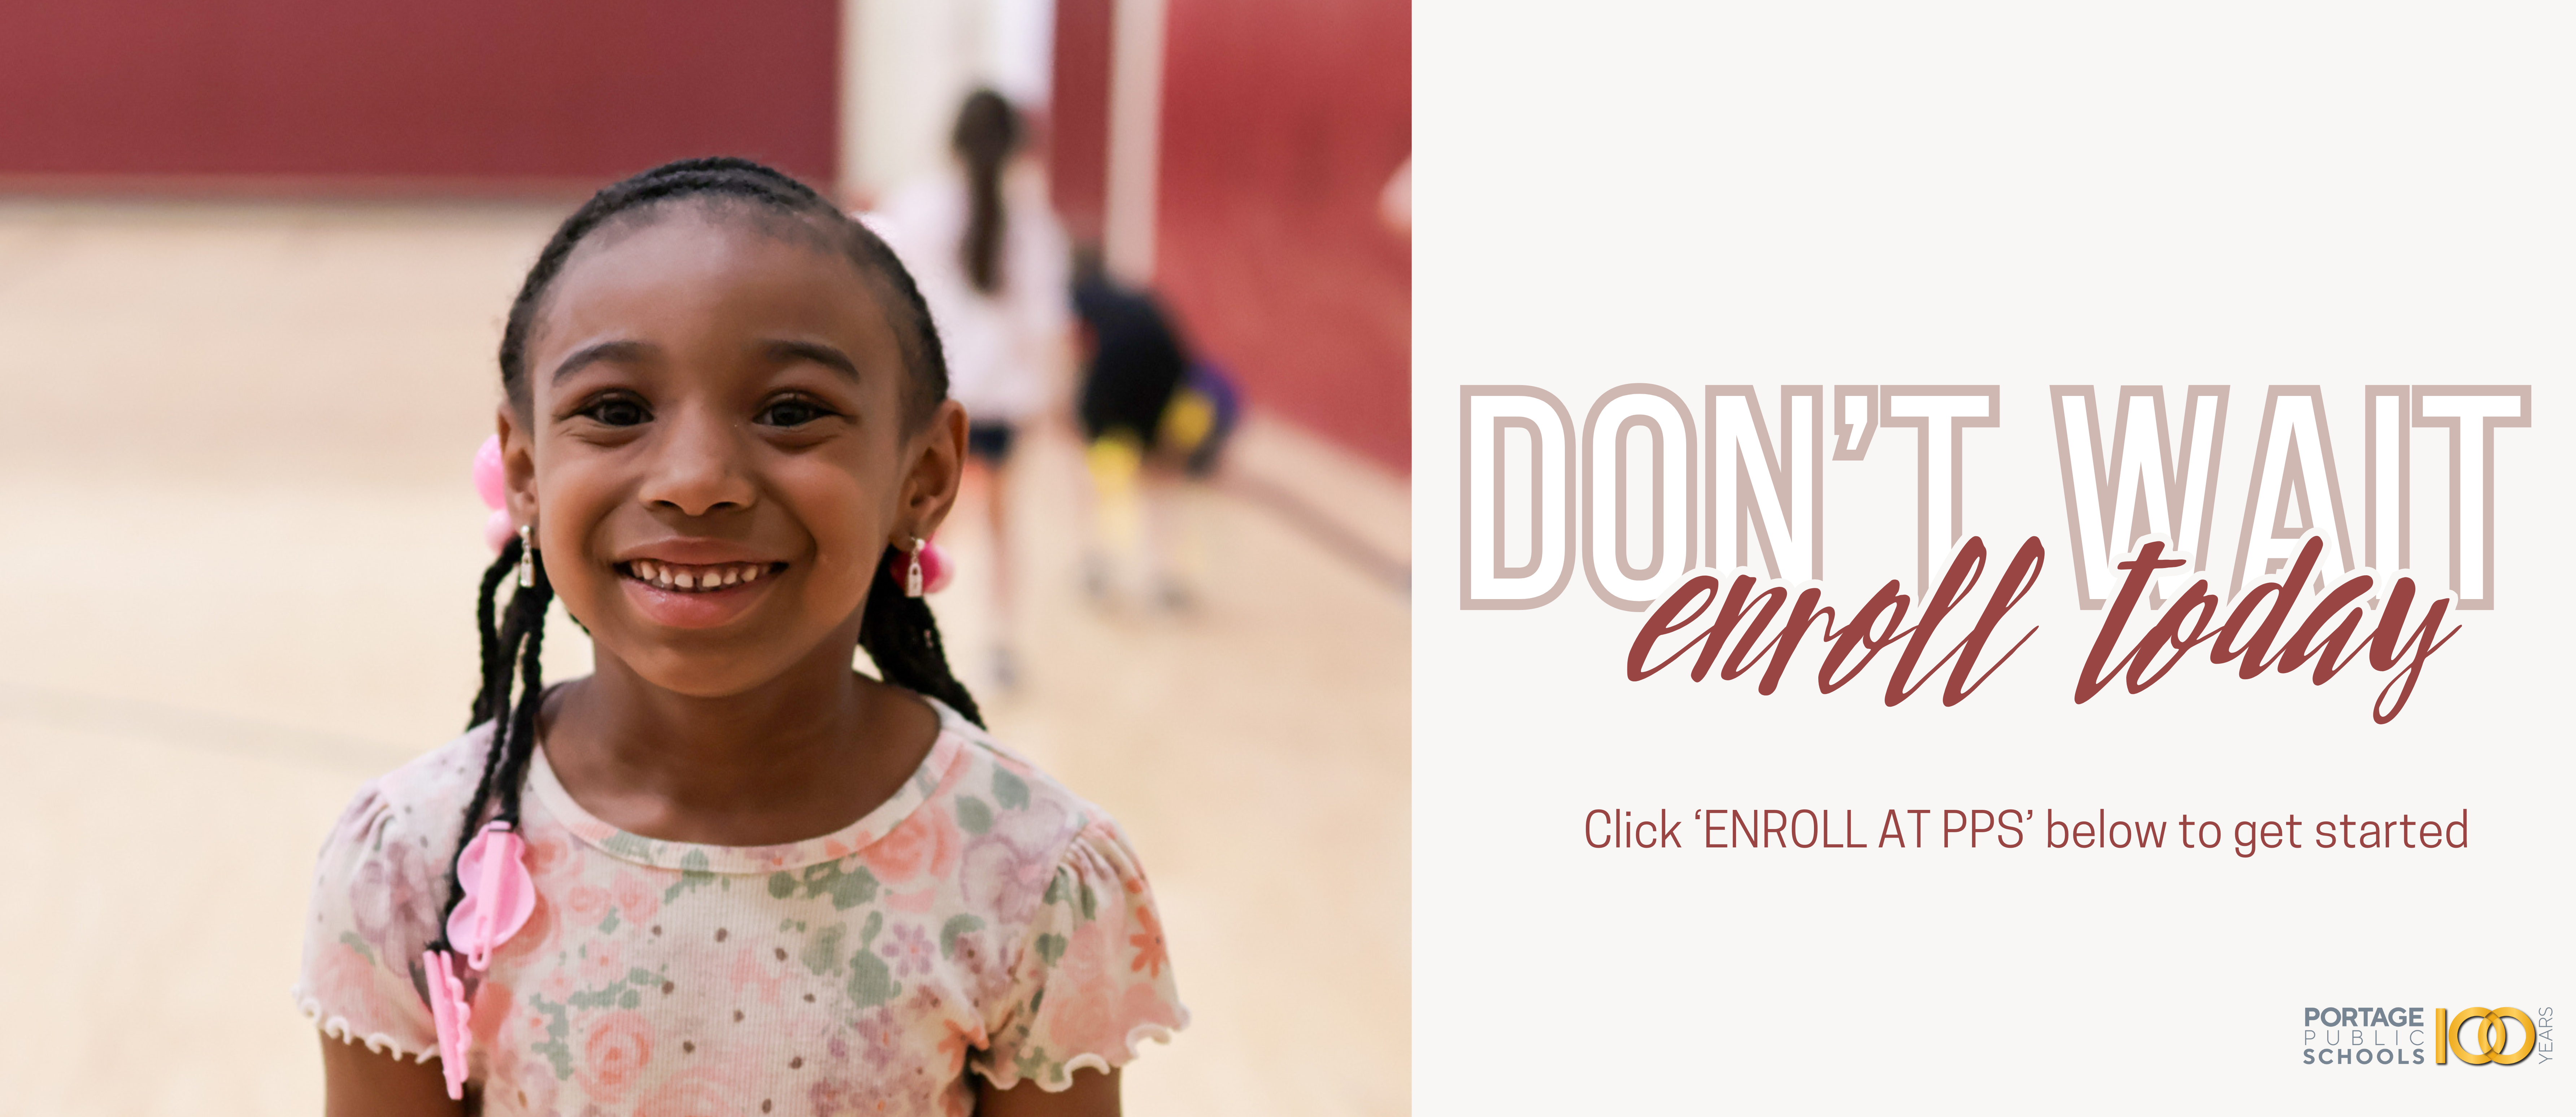 don't wait, enroll today. click enroll at pps below